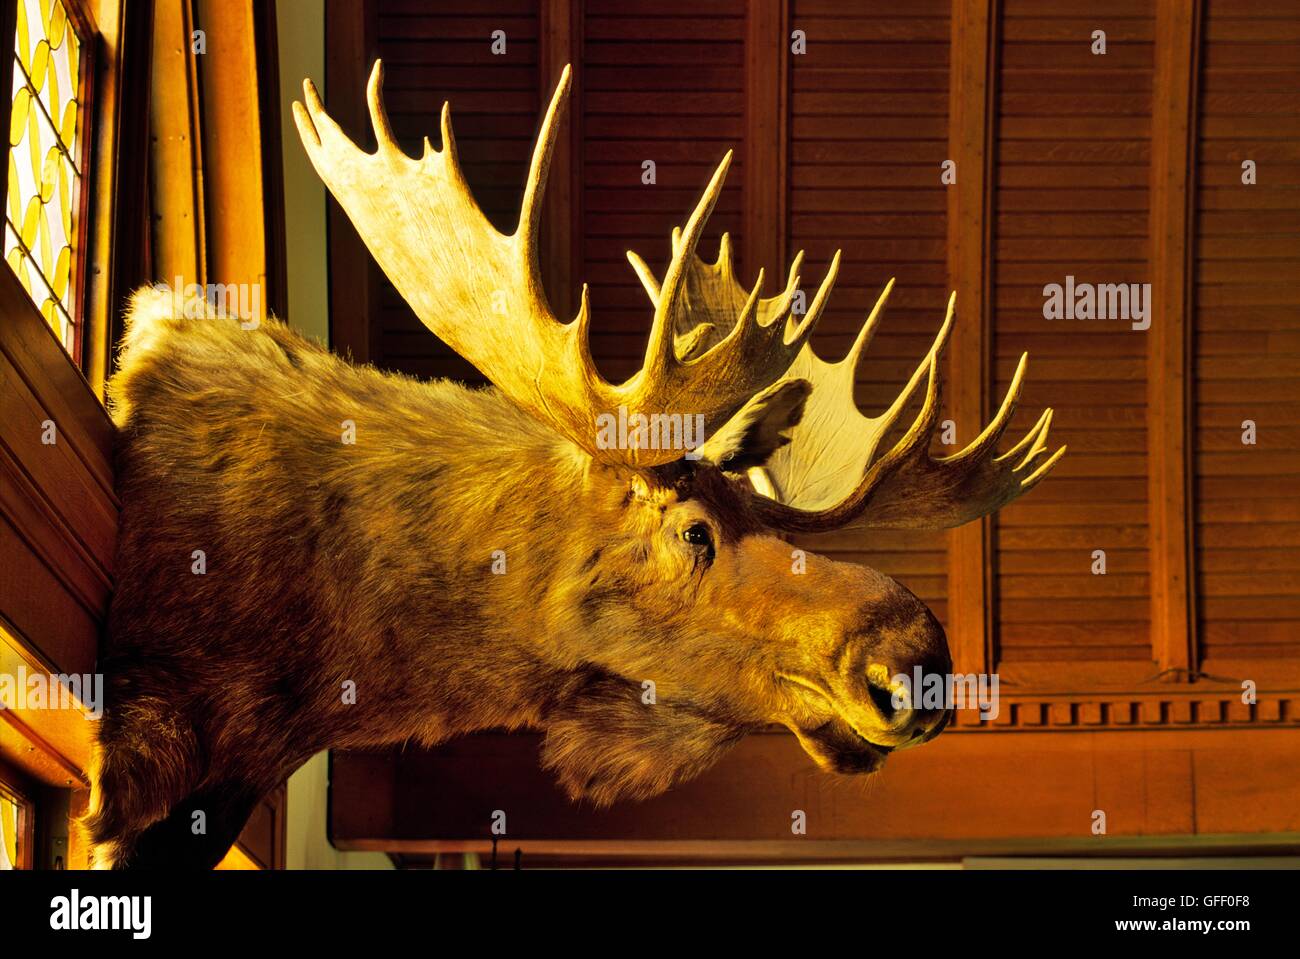 The Fairbanks Museum and Planetarium in the Vermont town of St. Johnsbury, New England, USA. Stuffed Moose head Stock Photo